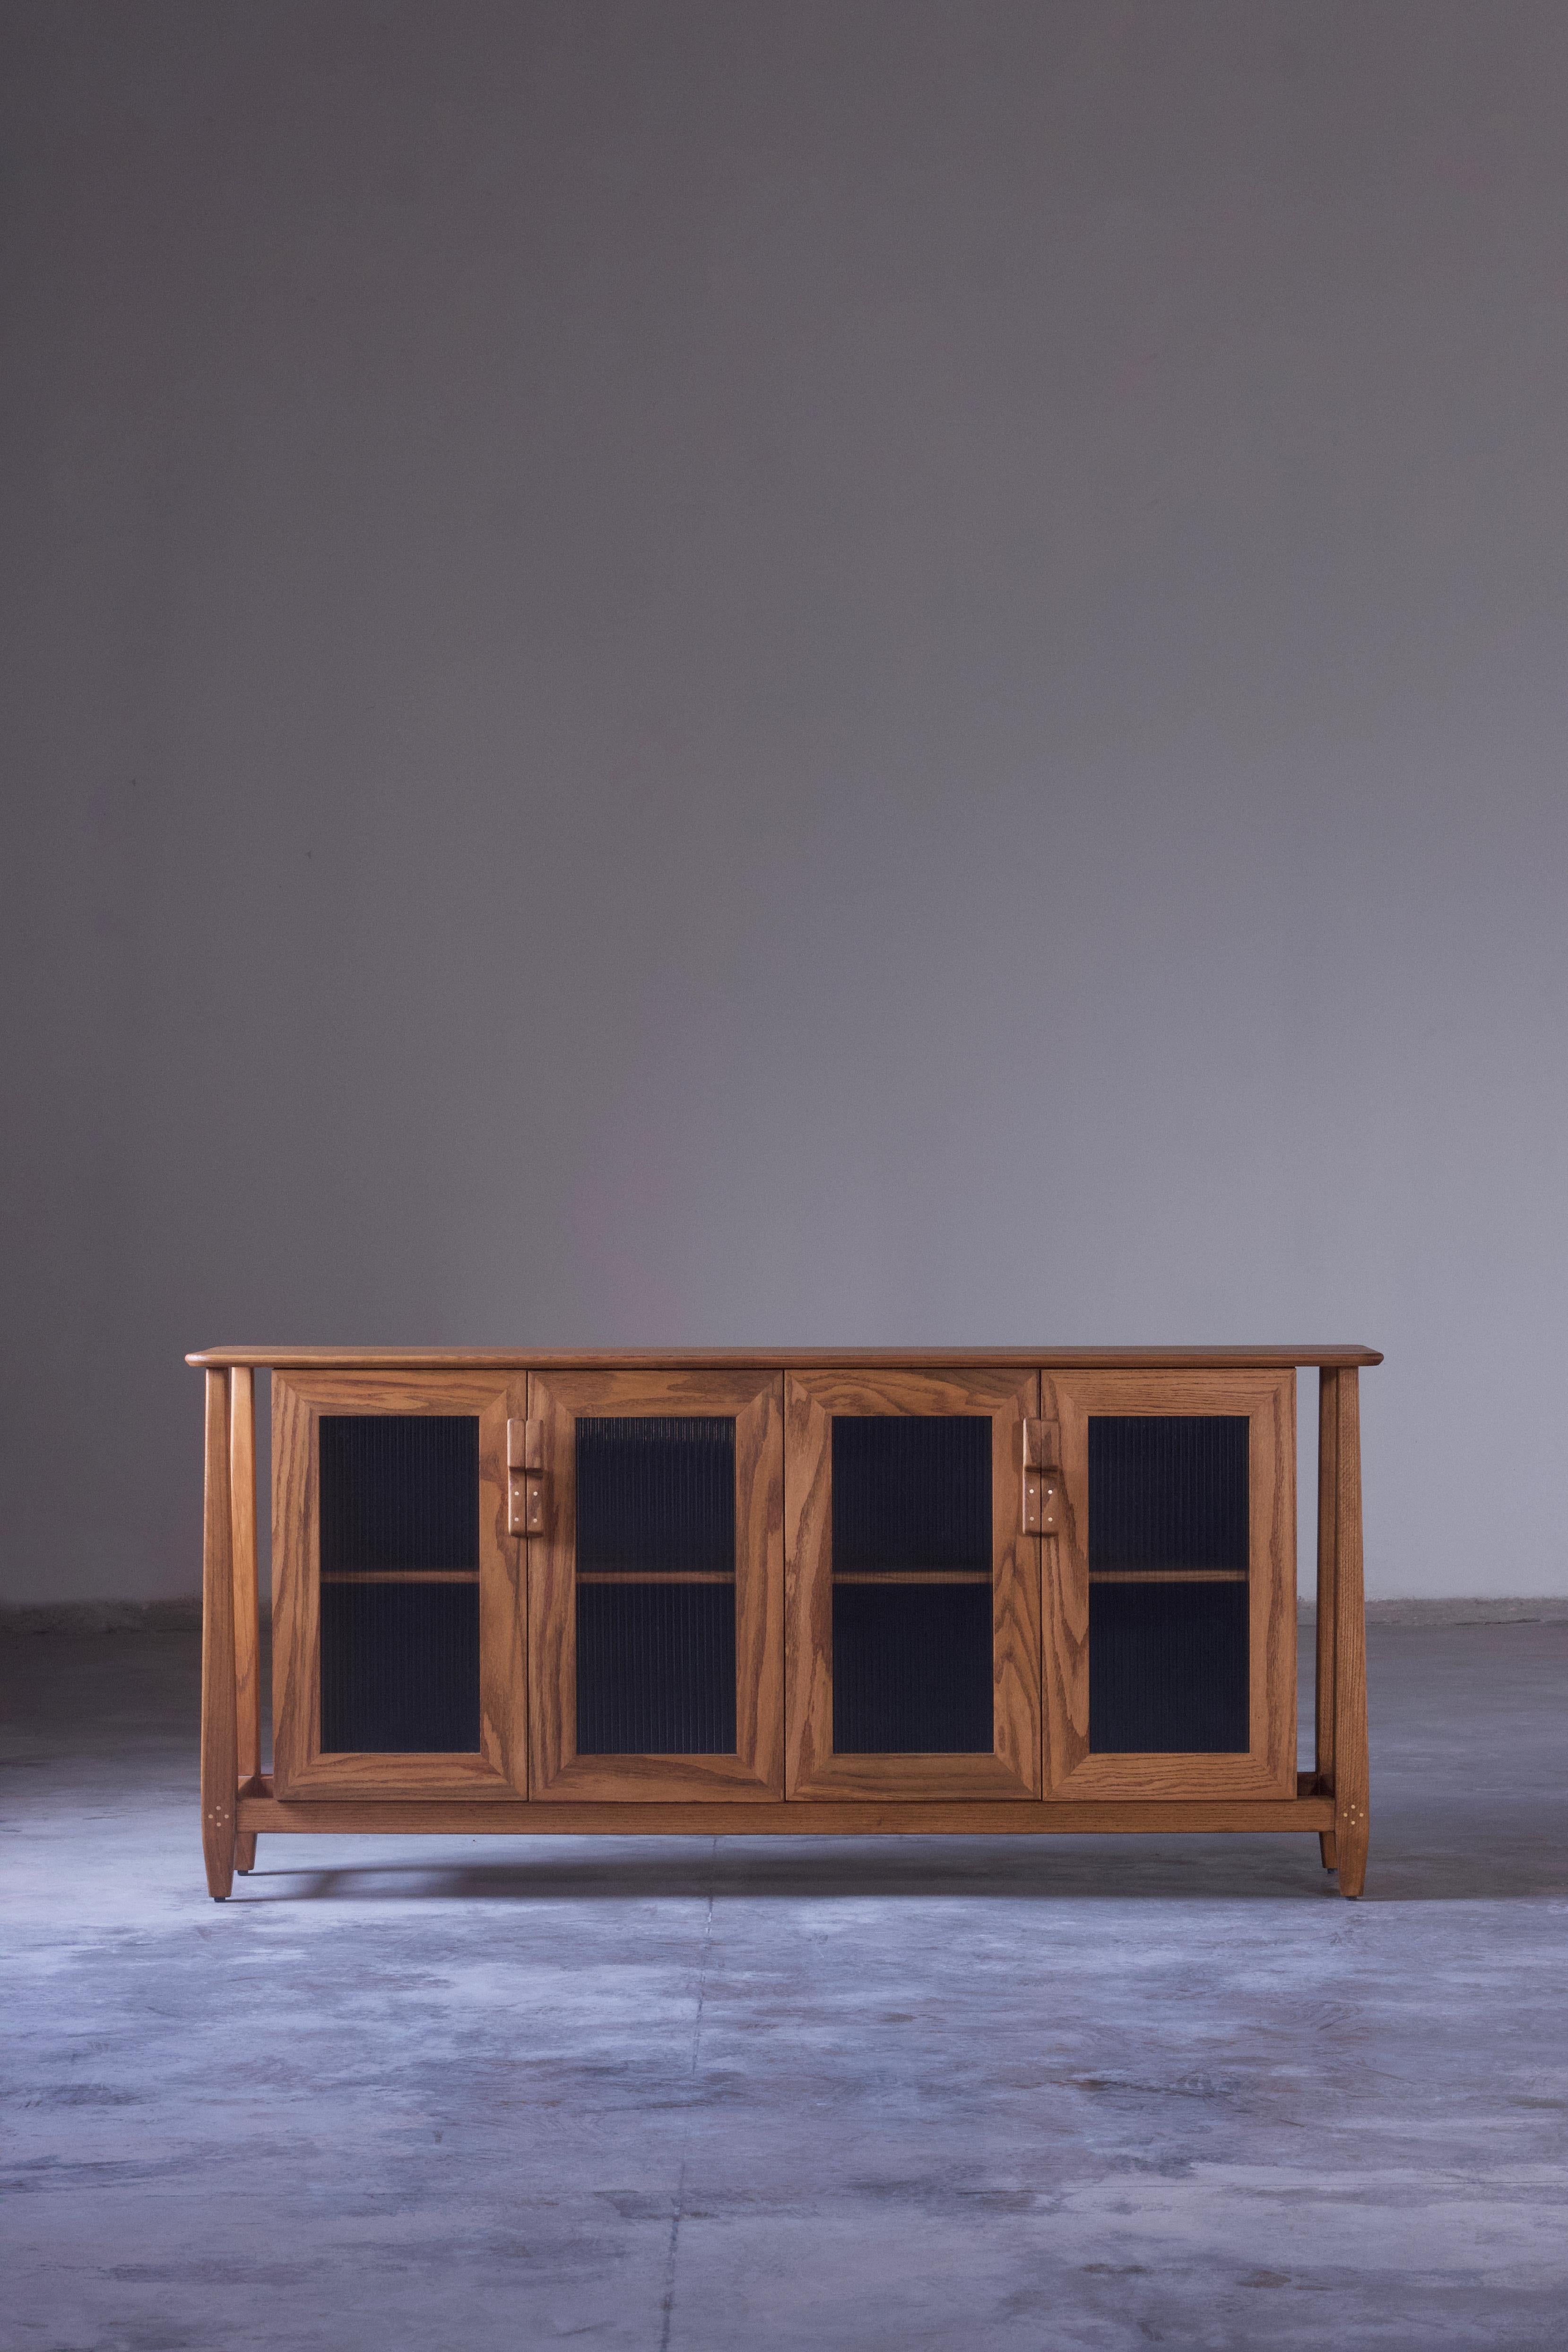 The Dvaara solid wood credenza/sideboard/buffet cabinet is a contemporary interpretation reminiscing traditional Indian architecture and elements. The elegant tapered legs, fluted glass shutters and extended frame of the design brings a visual